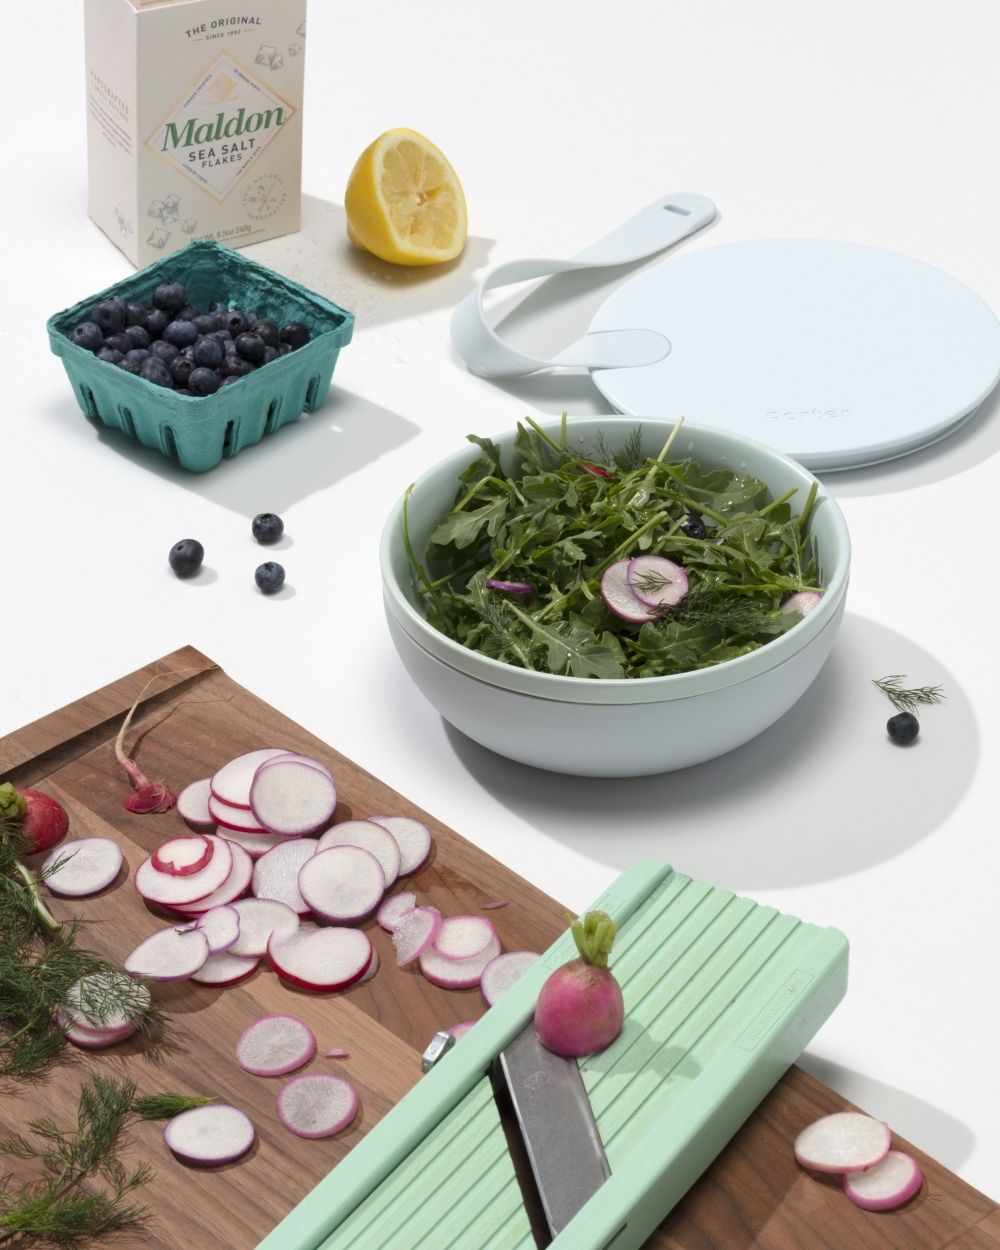 Portable Lunch Bowl by W&P Design in Brooklyn, New York // American-Made  Barware //